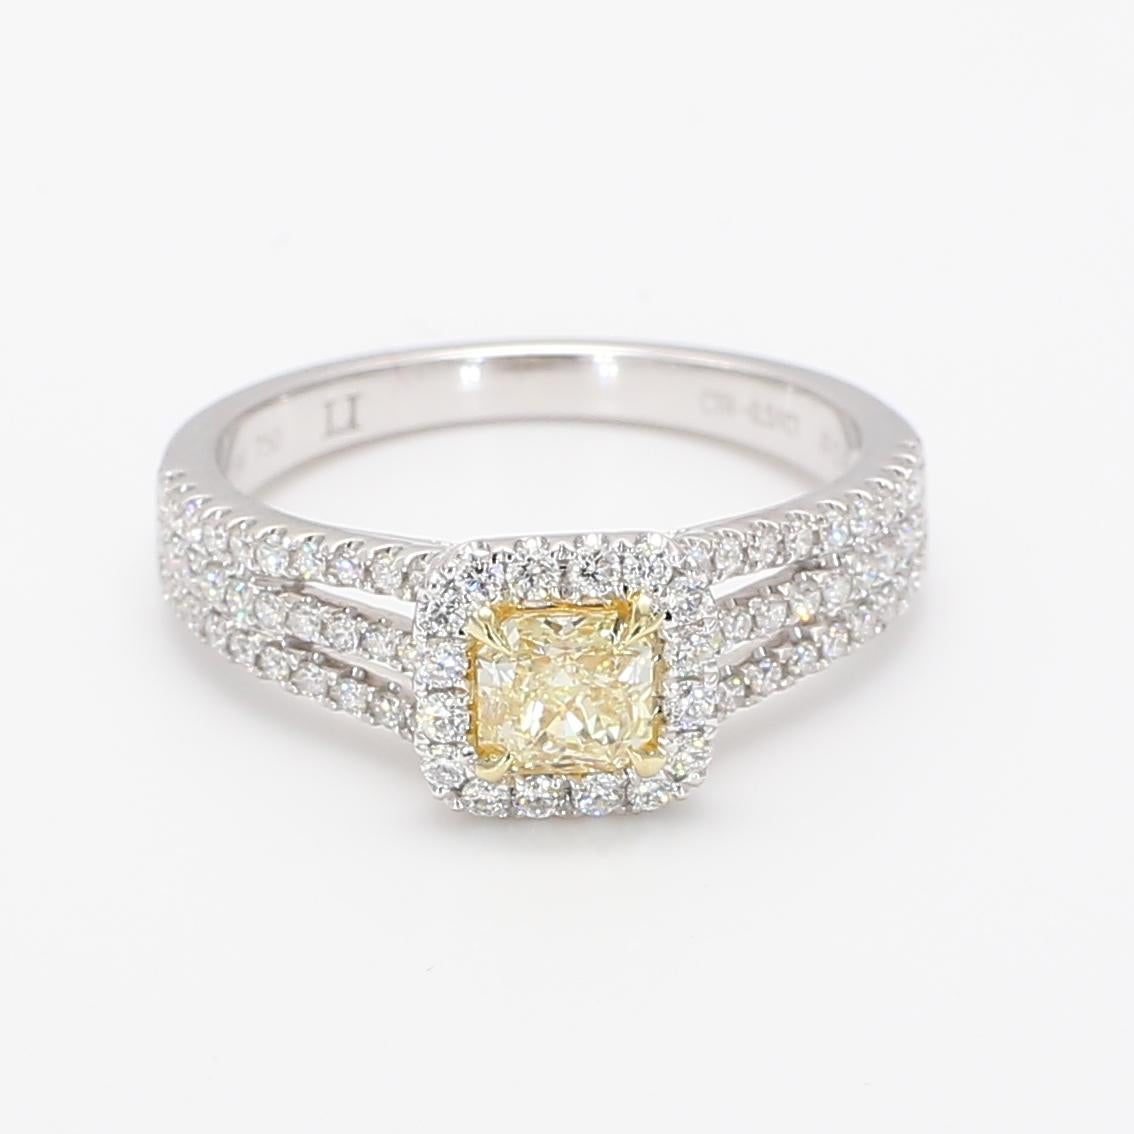 Rare radiant natural yellow diamond surrounded with natural round white diamonds. This ring is designed to be in a simple but intriguing setting with a single array of diamonds surrounding the centerstone as well as diamonds along the beautiful